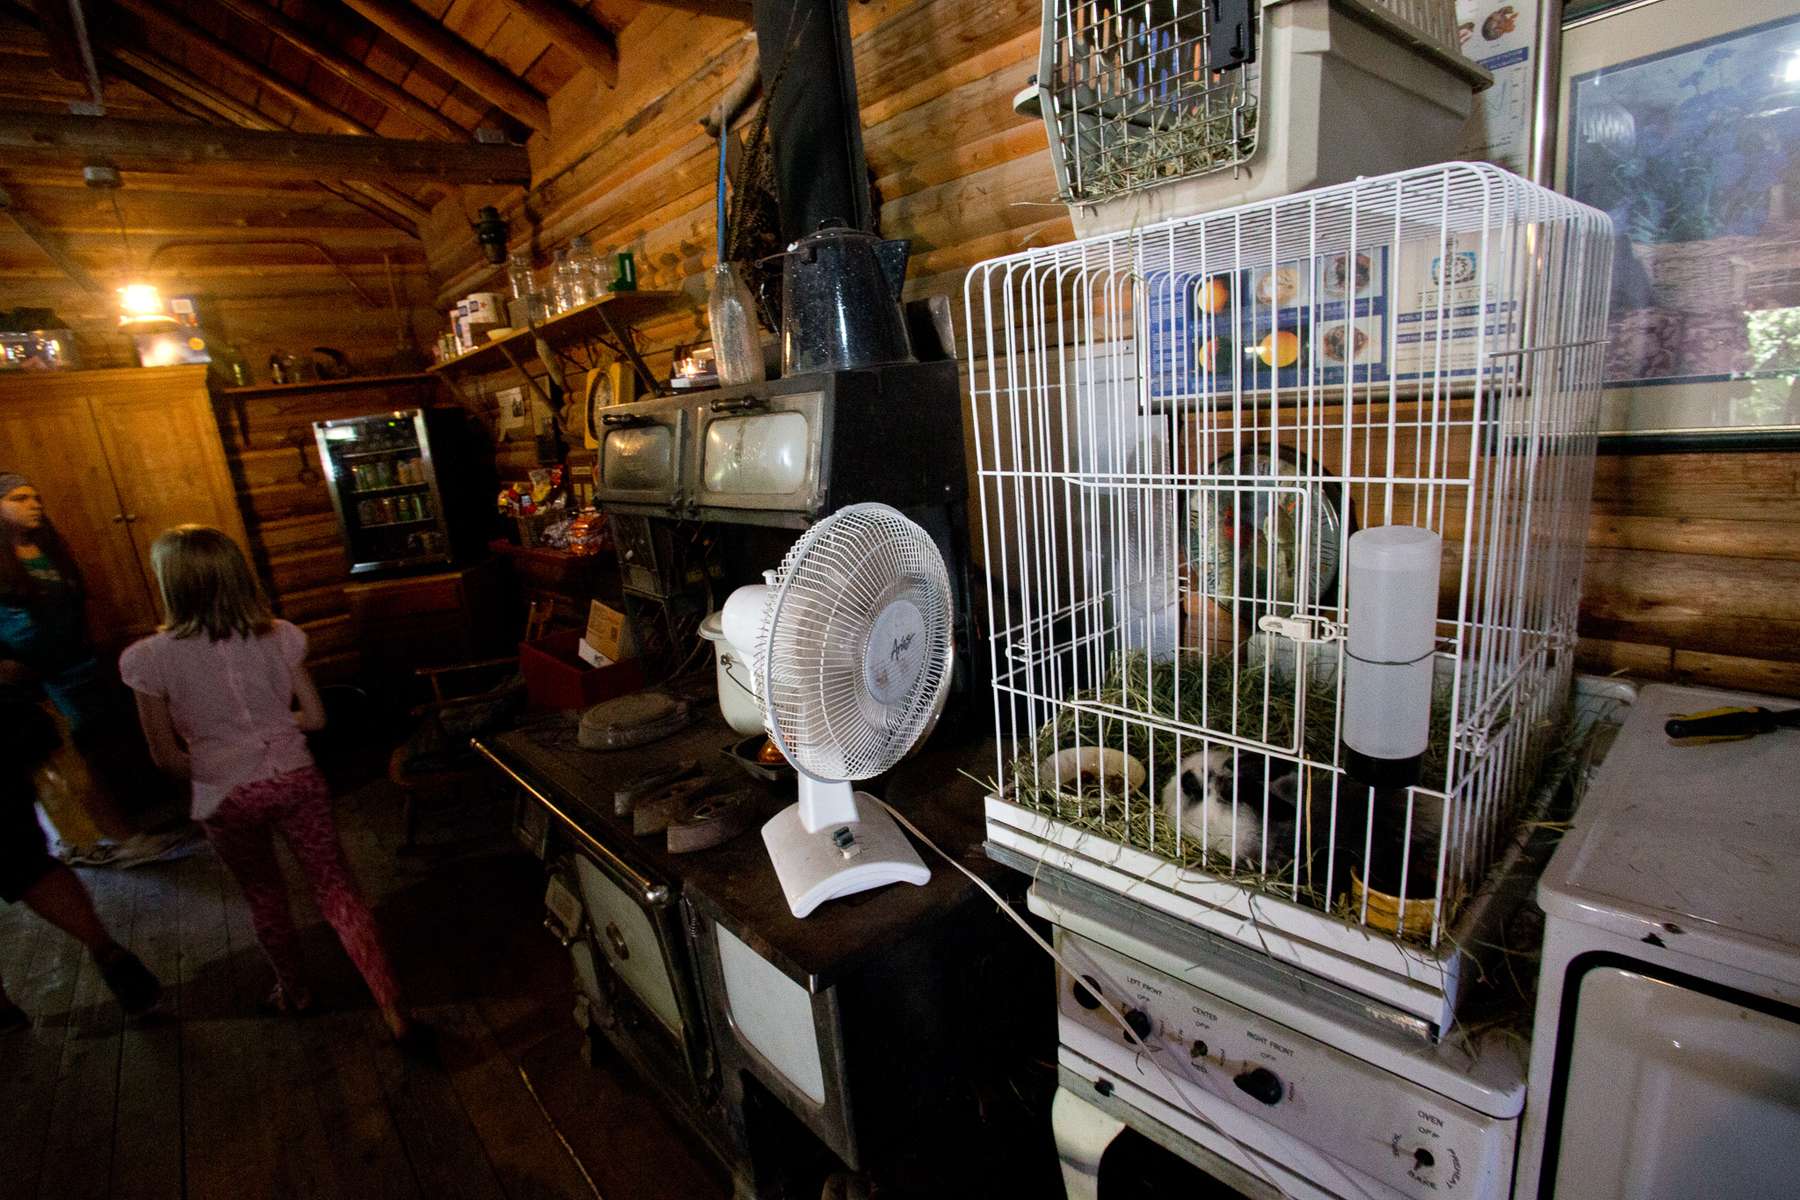 Caged animals are seen in the giftstore at the Outback Kangaroo Farm, a privately owned petting zoo, on July 20, 2016 in Arlington, WA.  (photo © Karen Ducey Photography)